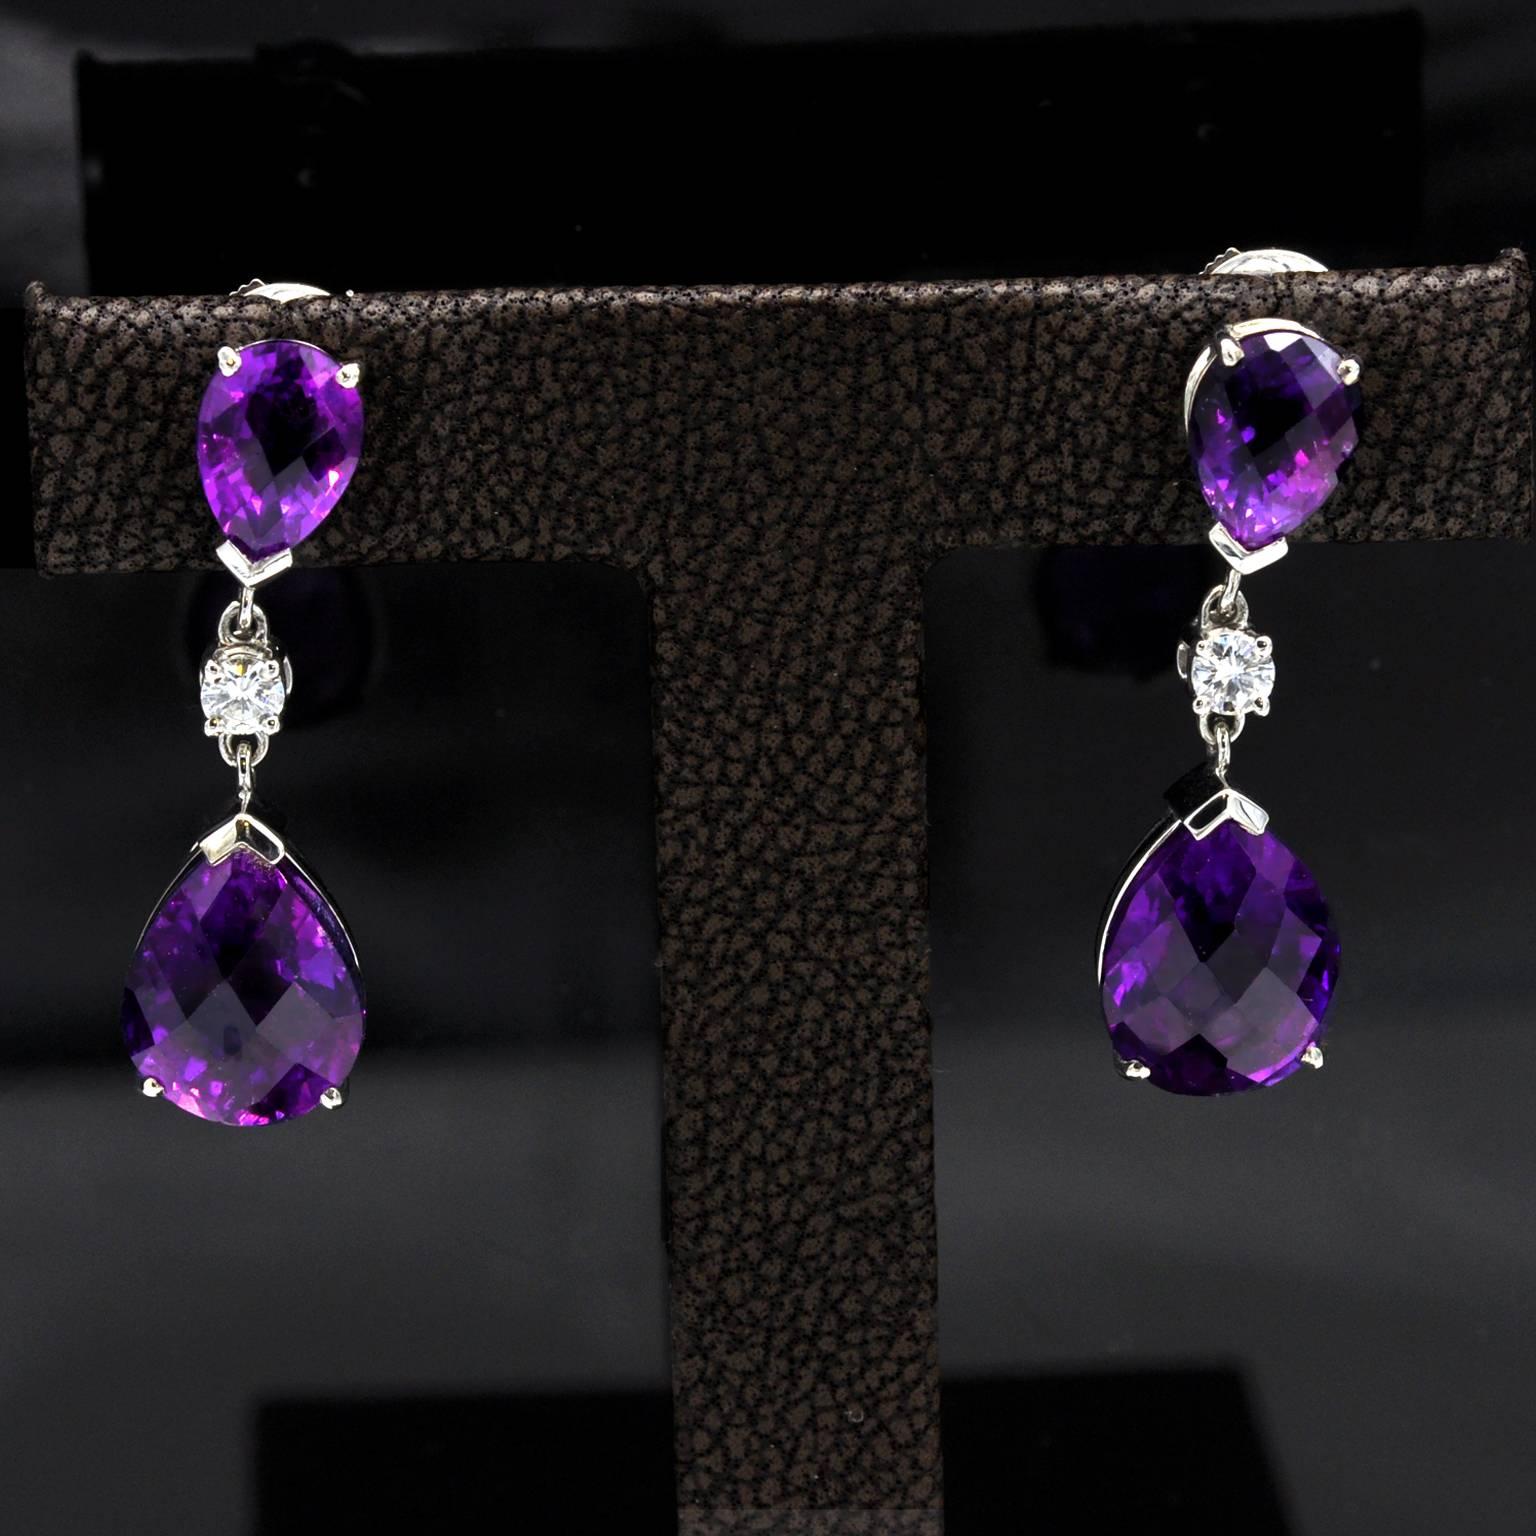 Very elegant dandle earrings : four beautiful amethyst, lively and saturated, highlighted with two diamonds.
Amethyst: 14.08 carat
Diamonds: 0,31 carat